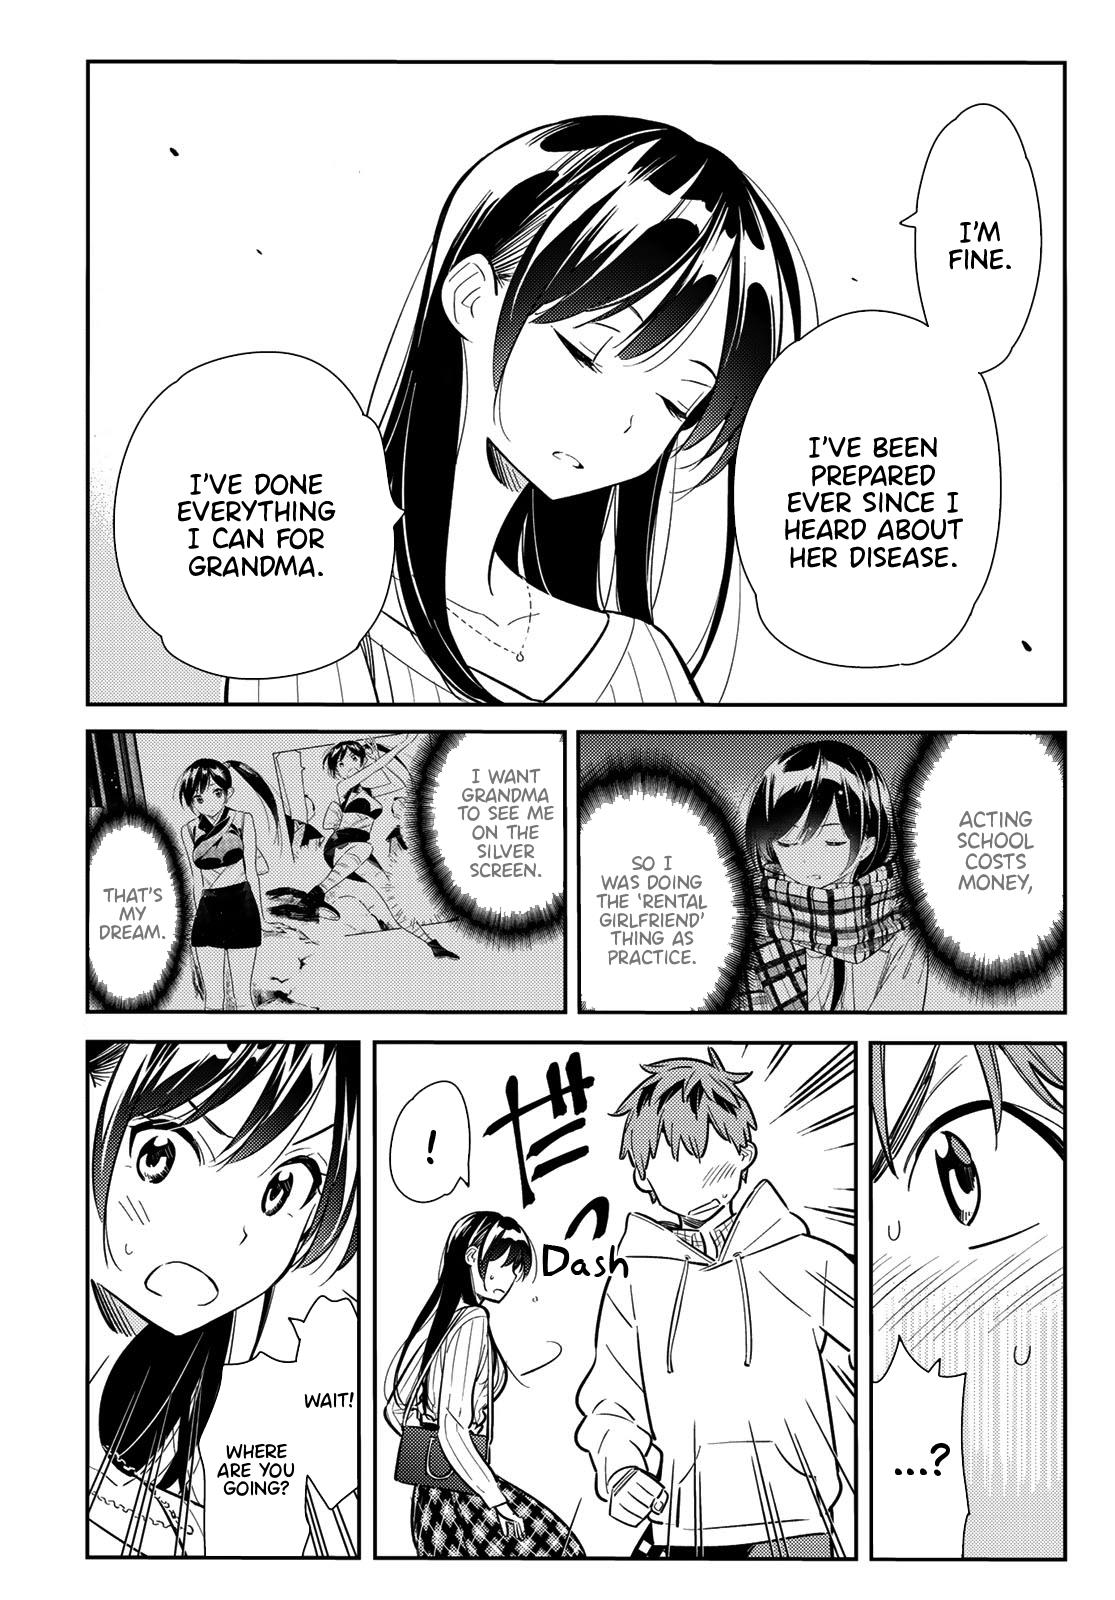 Rent A GirlFriend, Chapter 90 image 016